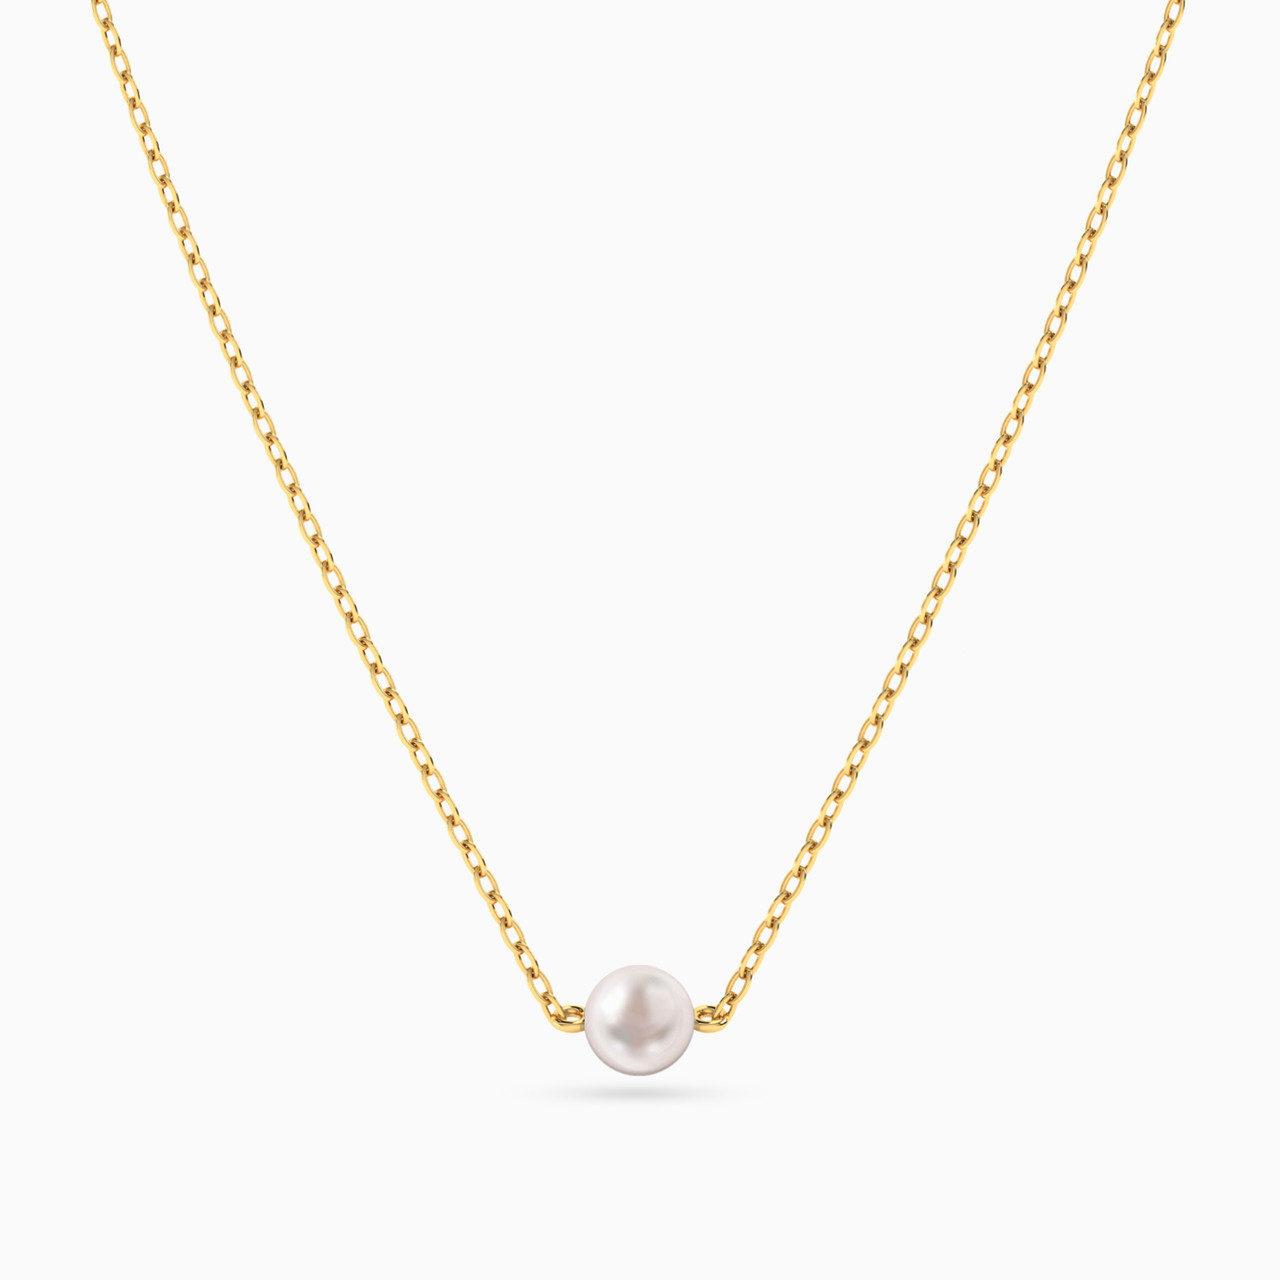 14K Gold Pearls Pendant Necklace